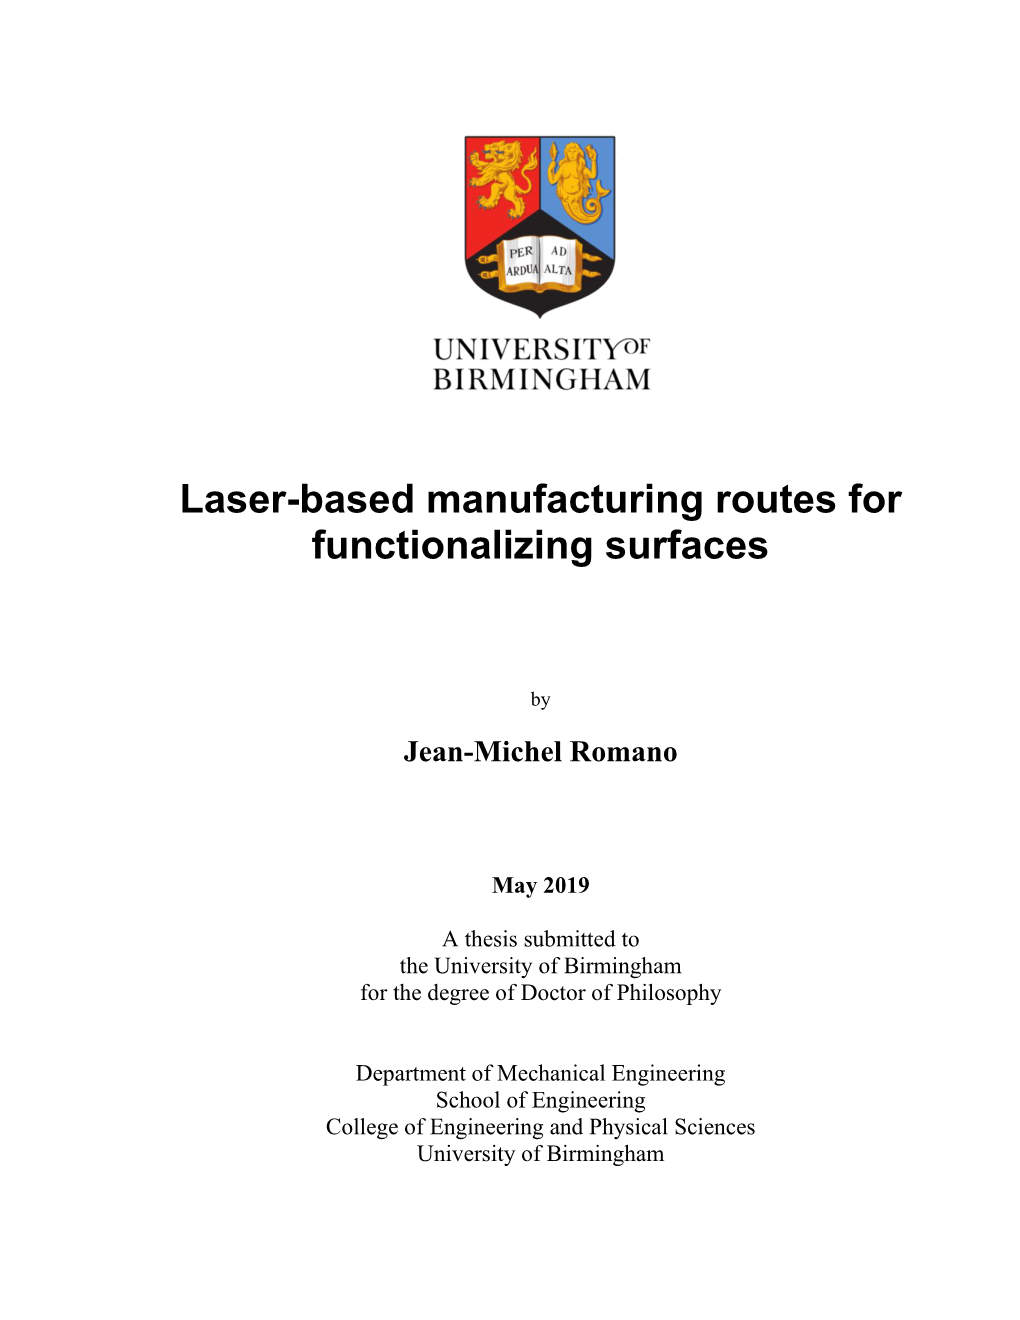 Laser-Based Manufacturing Routes for Functionalizing Surfaces